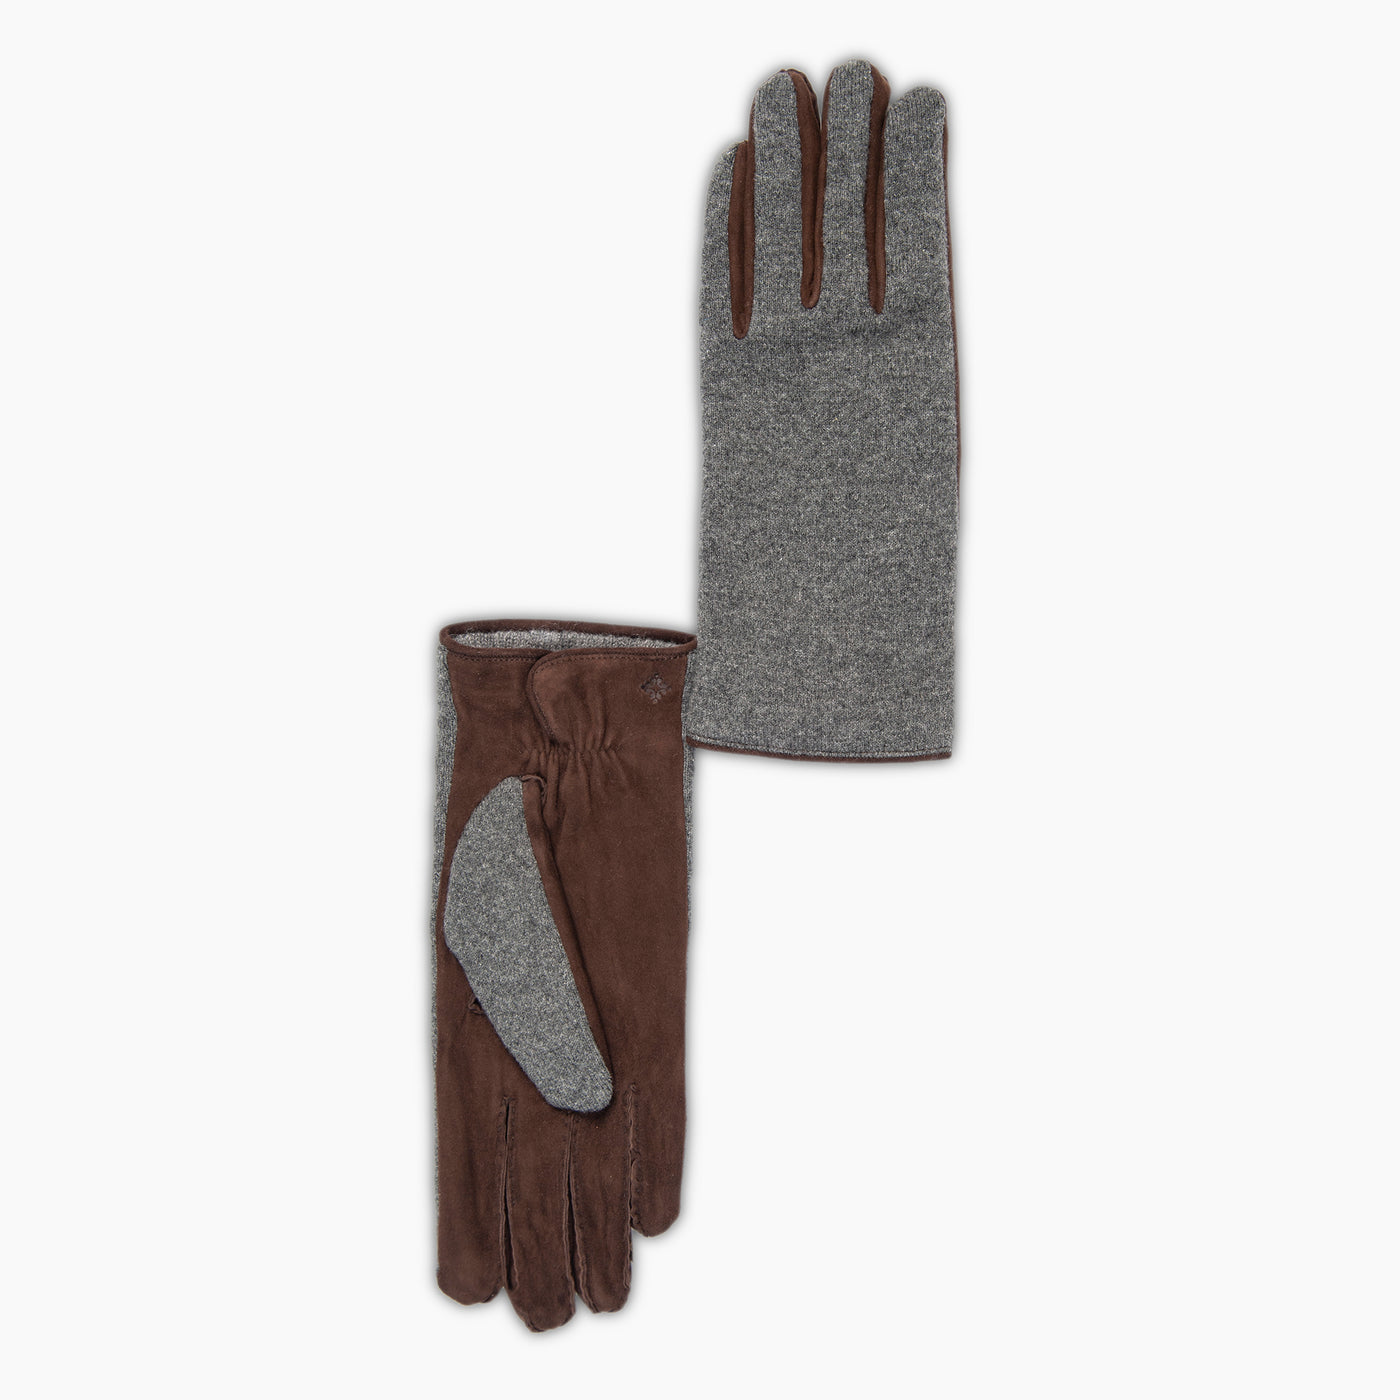 Verne Leather gloves-cashmere knit and soft suede